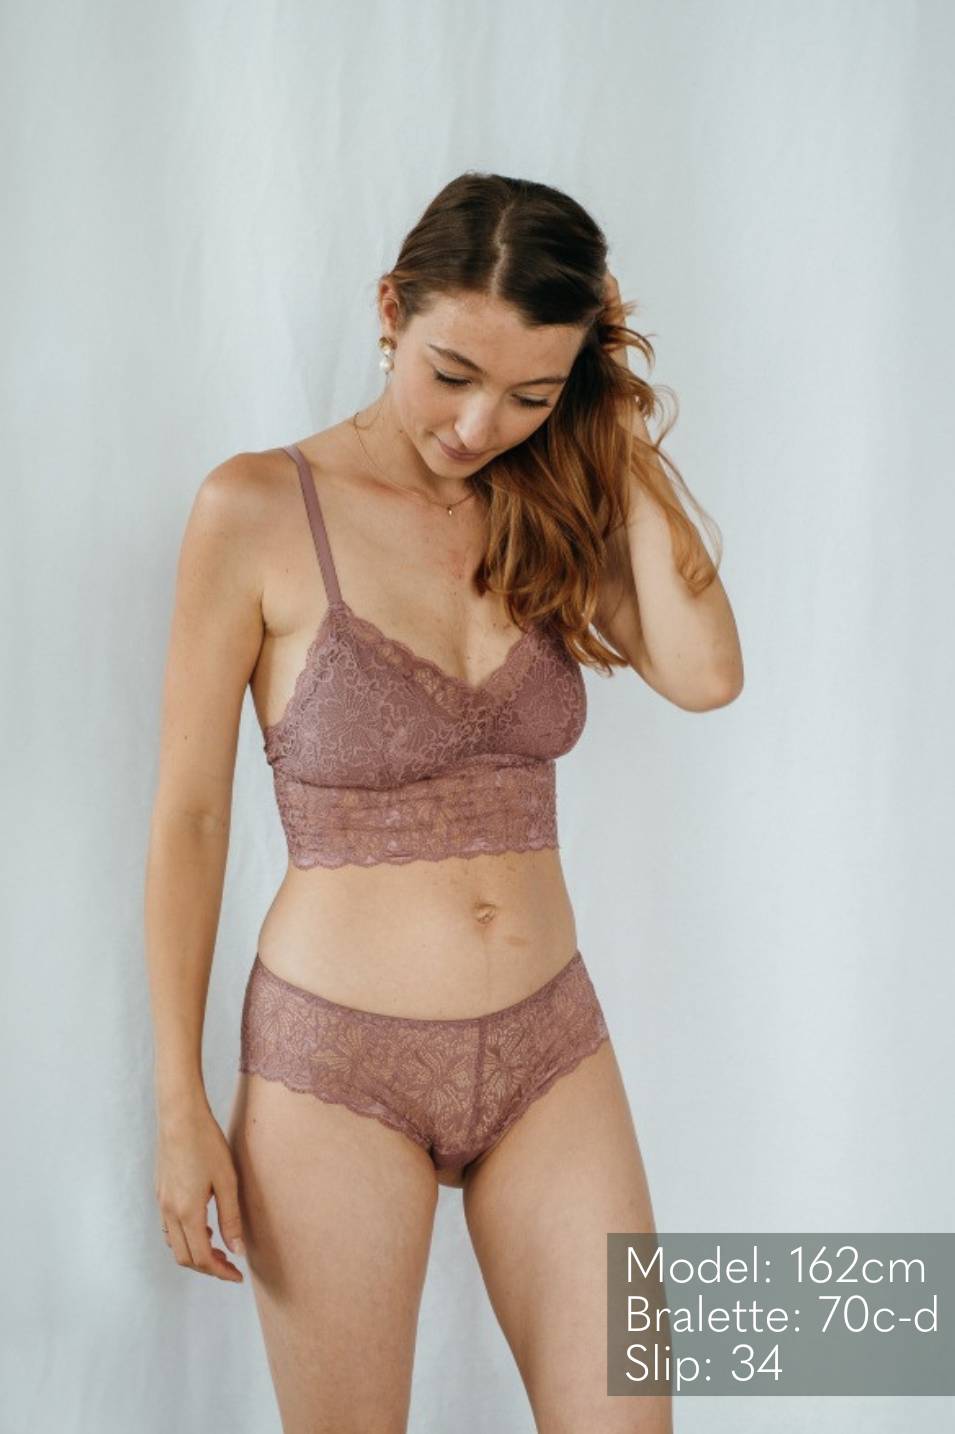 Model wears Bralette and slip Vivi in smockey rose, photographed from the front. 